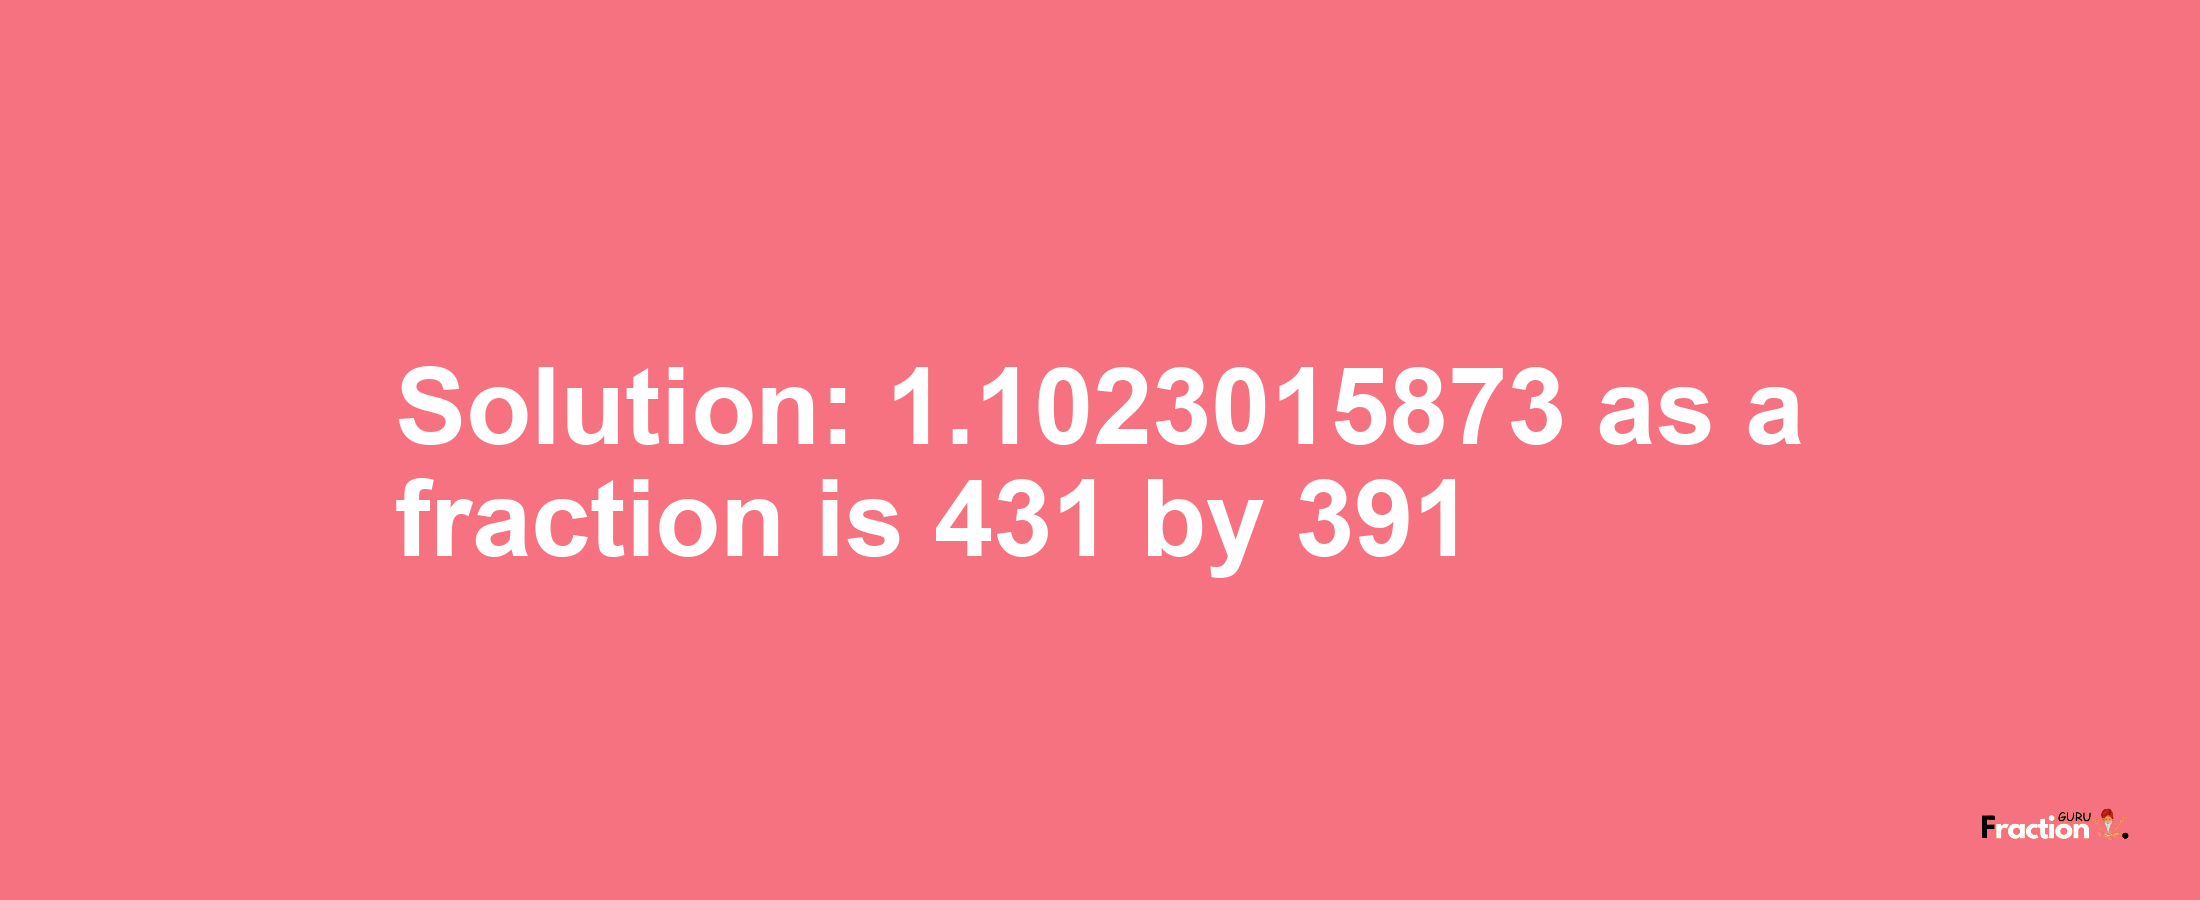 Solution:1.1023015873 as a fraction is 431/391